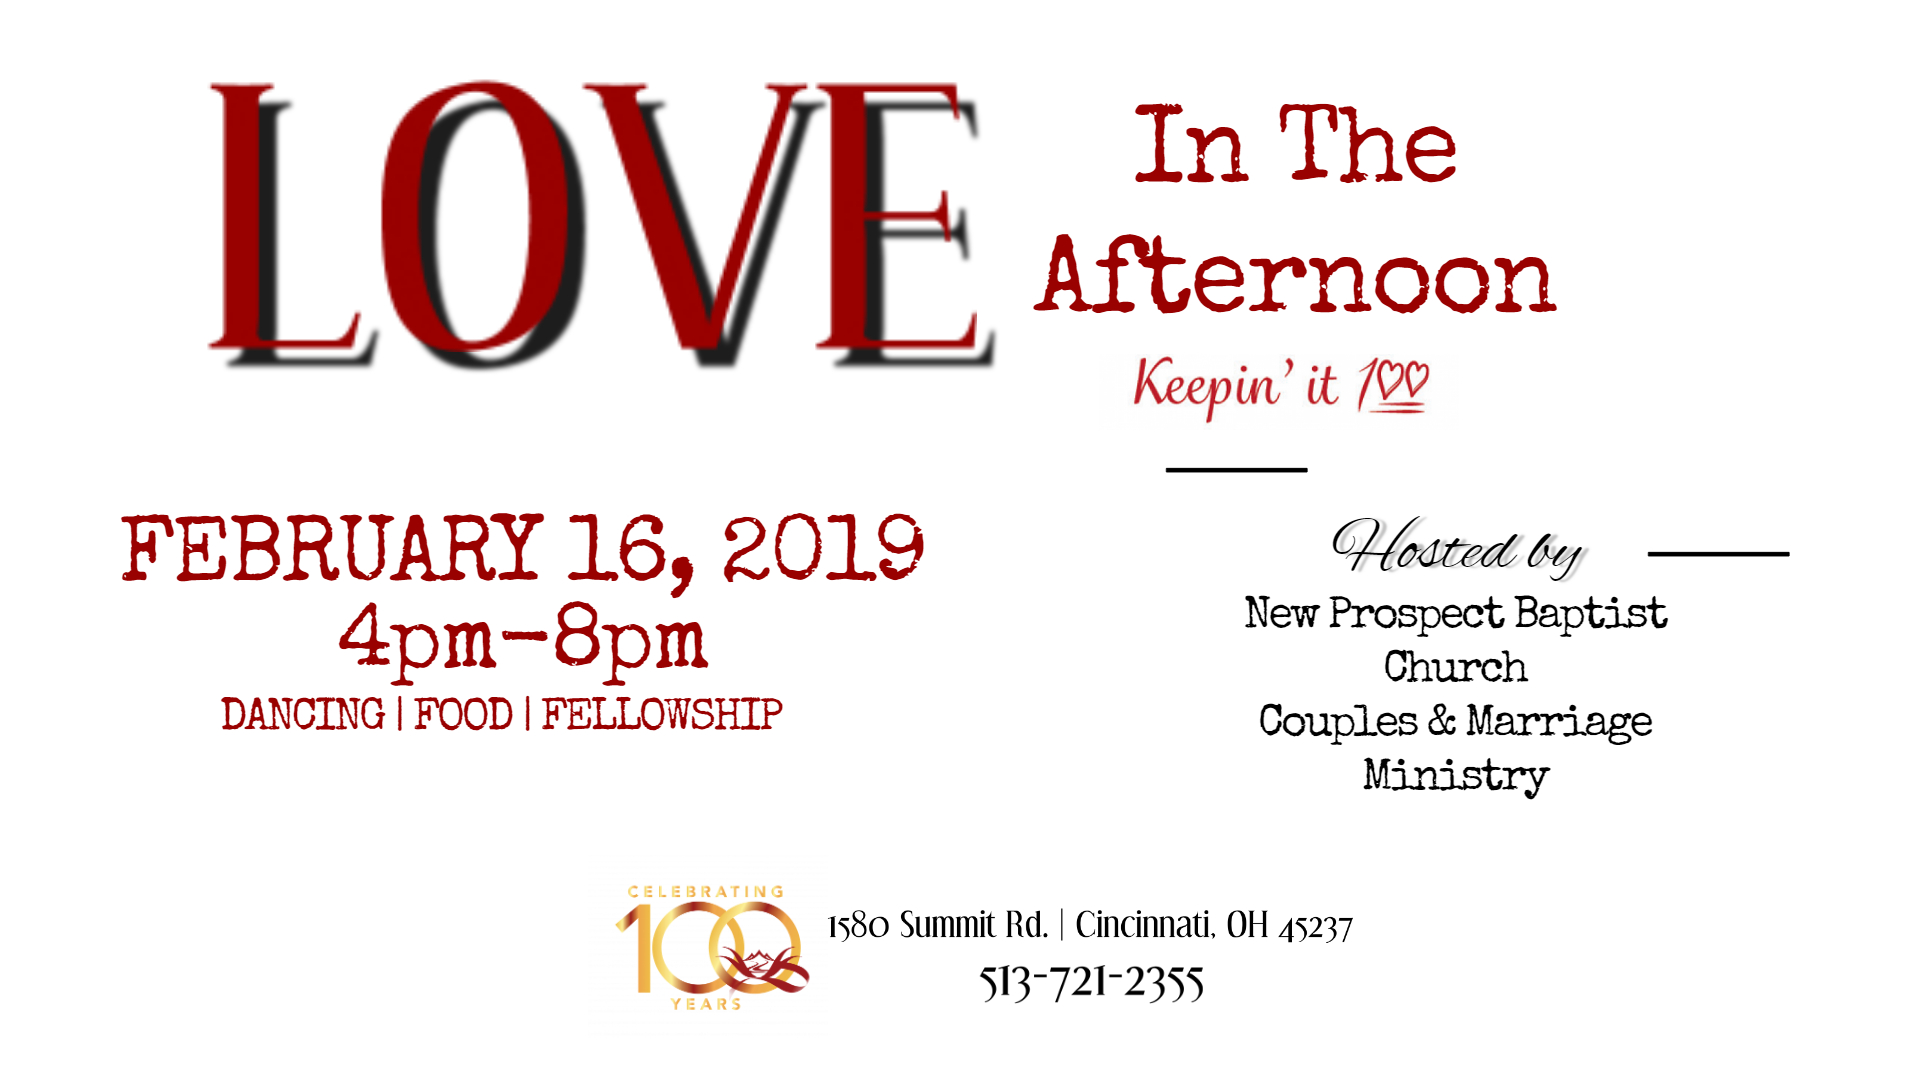 New Prospect Baptist Church presents LOVE in the Afternoon on Saturday February 16th 4 - 8 pm